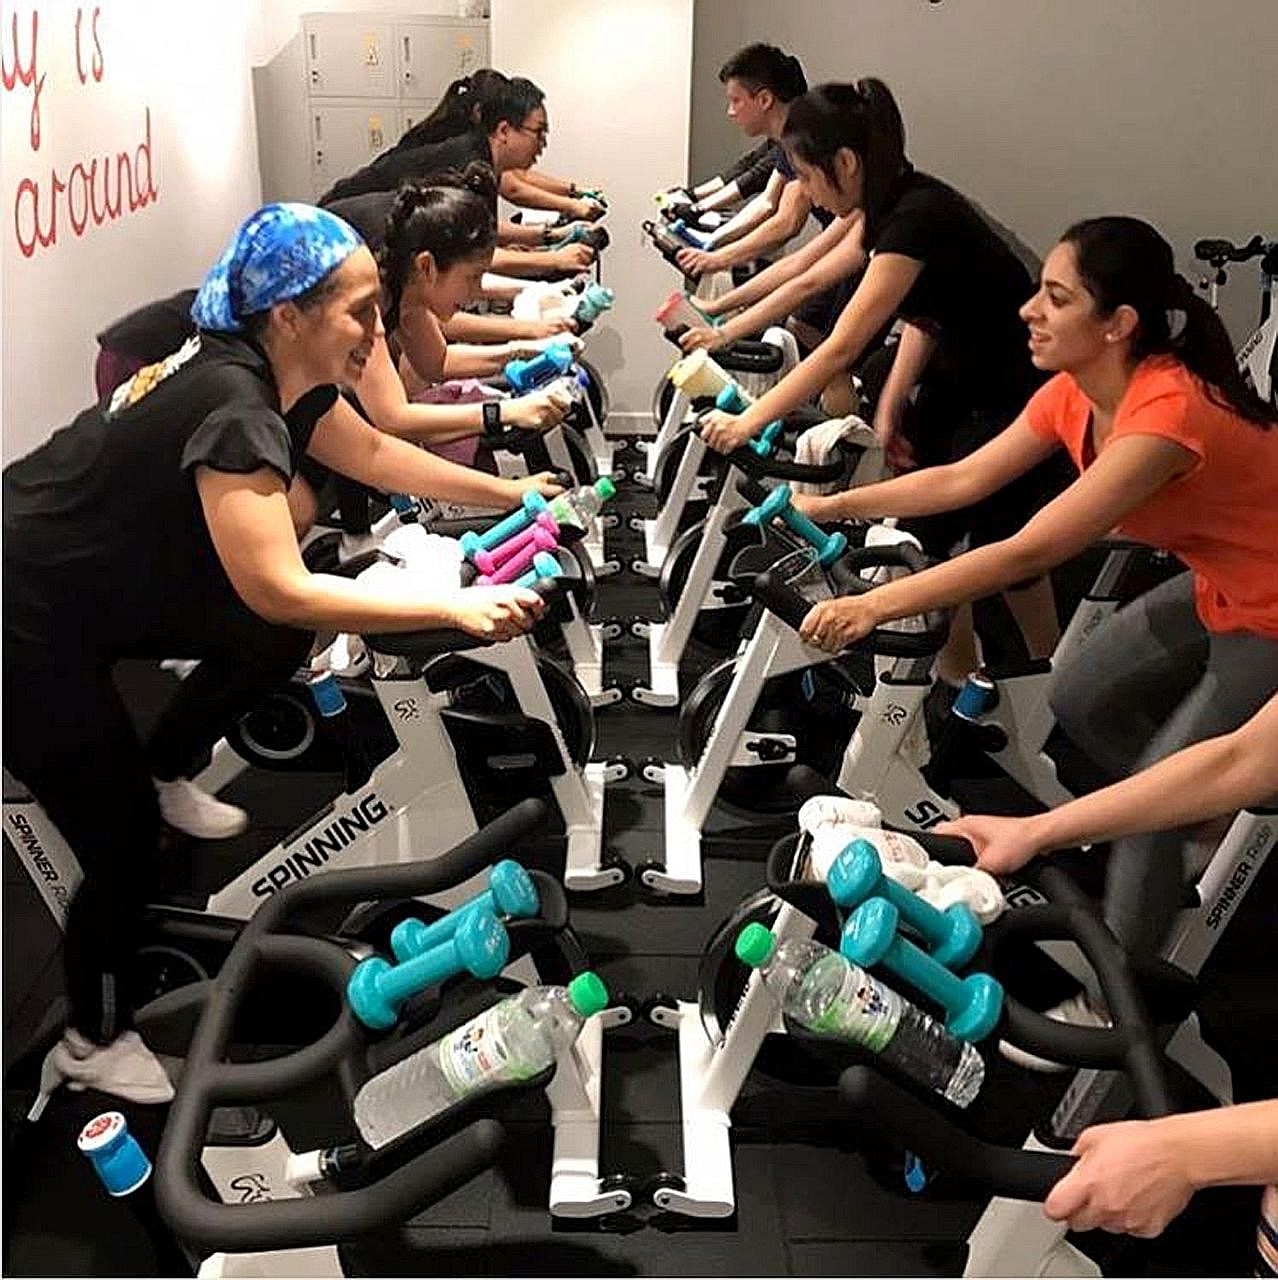 Cycling studios like Aloha Cycle Club in Kuala Lumpur are cashing in on the demand for spinning, an exercise that combines cycling with music, from young, urban Malaysians.